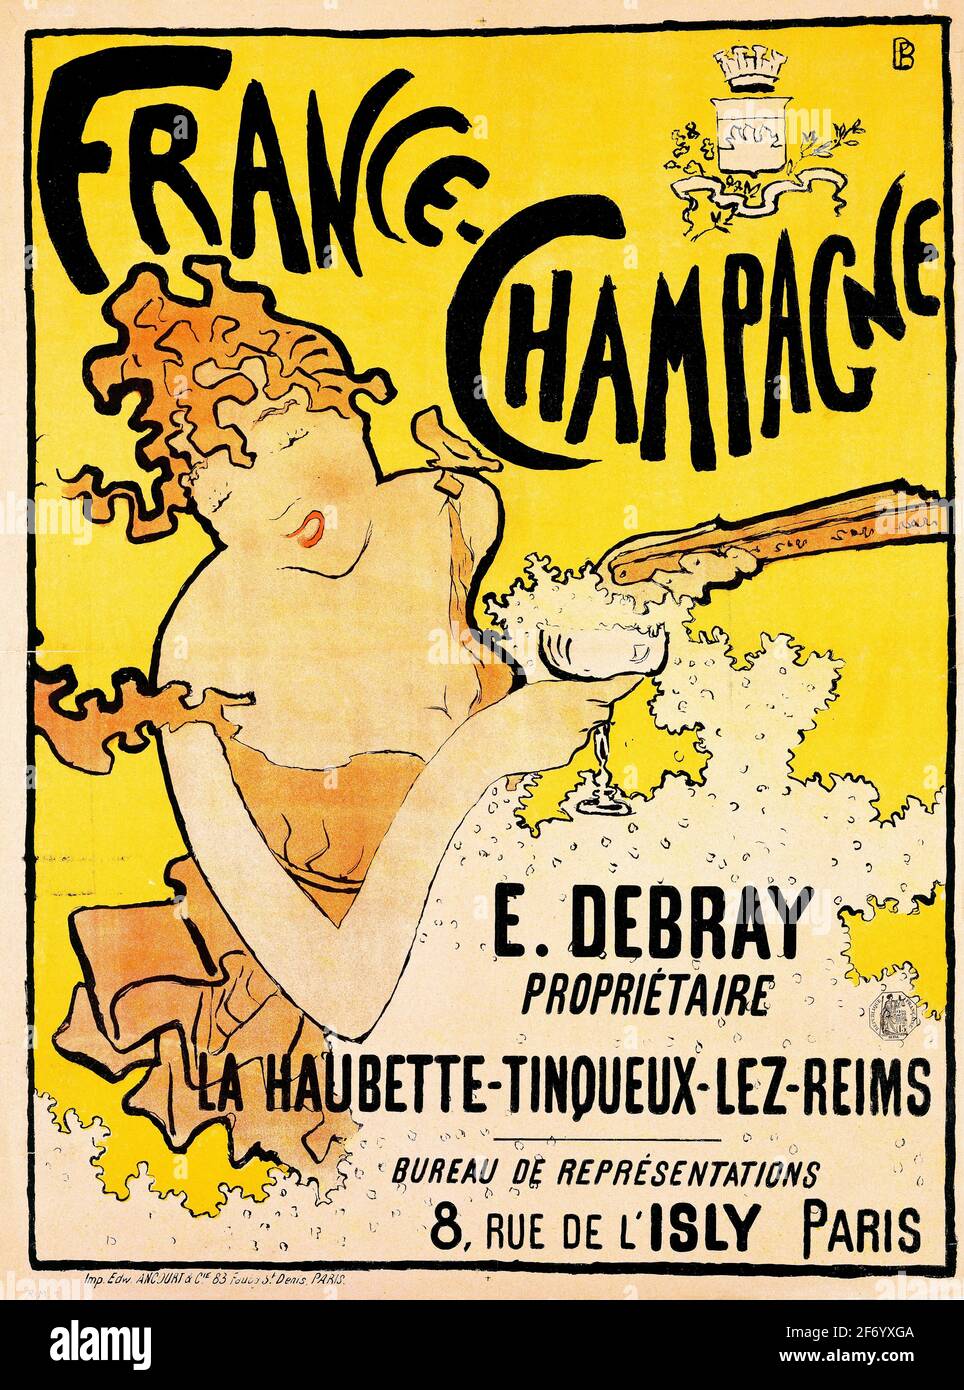 France Champagne, Art Nouveau style poster by the French artist, Pierre Bonnard (1867-1947), colour lithograph, c. 1889/91 Stock Photo